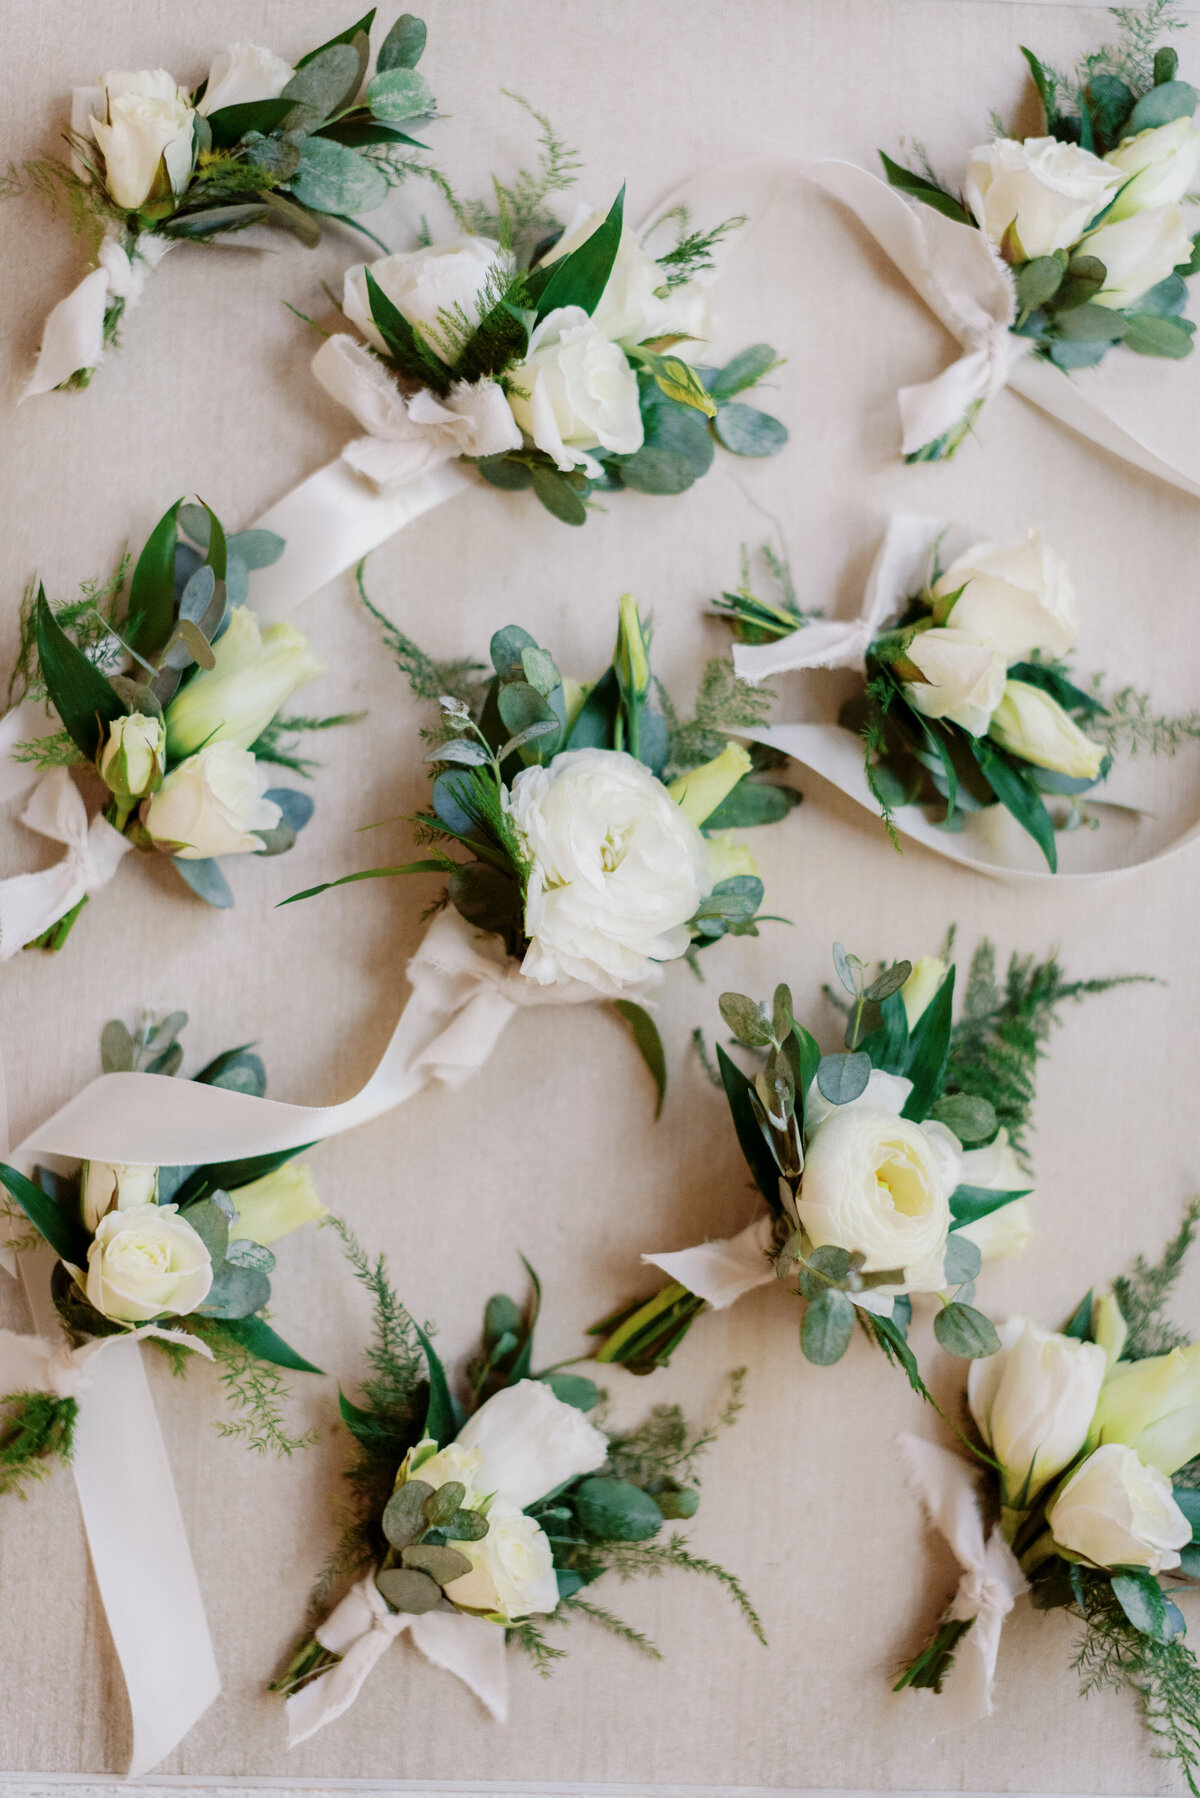 A collection of Boutonnières for the groom and groomsmen. All a collection of white flowers and greenery.